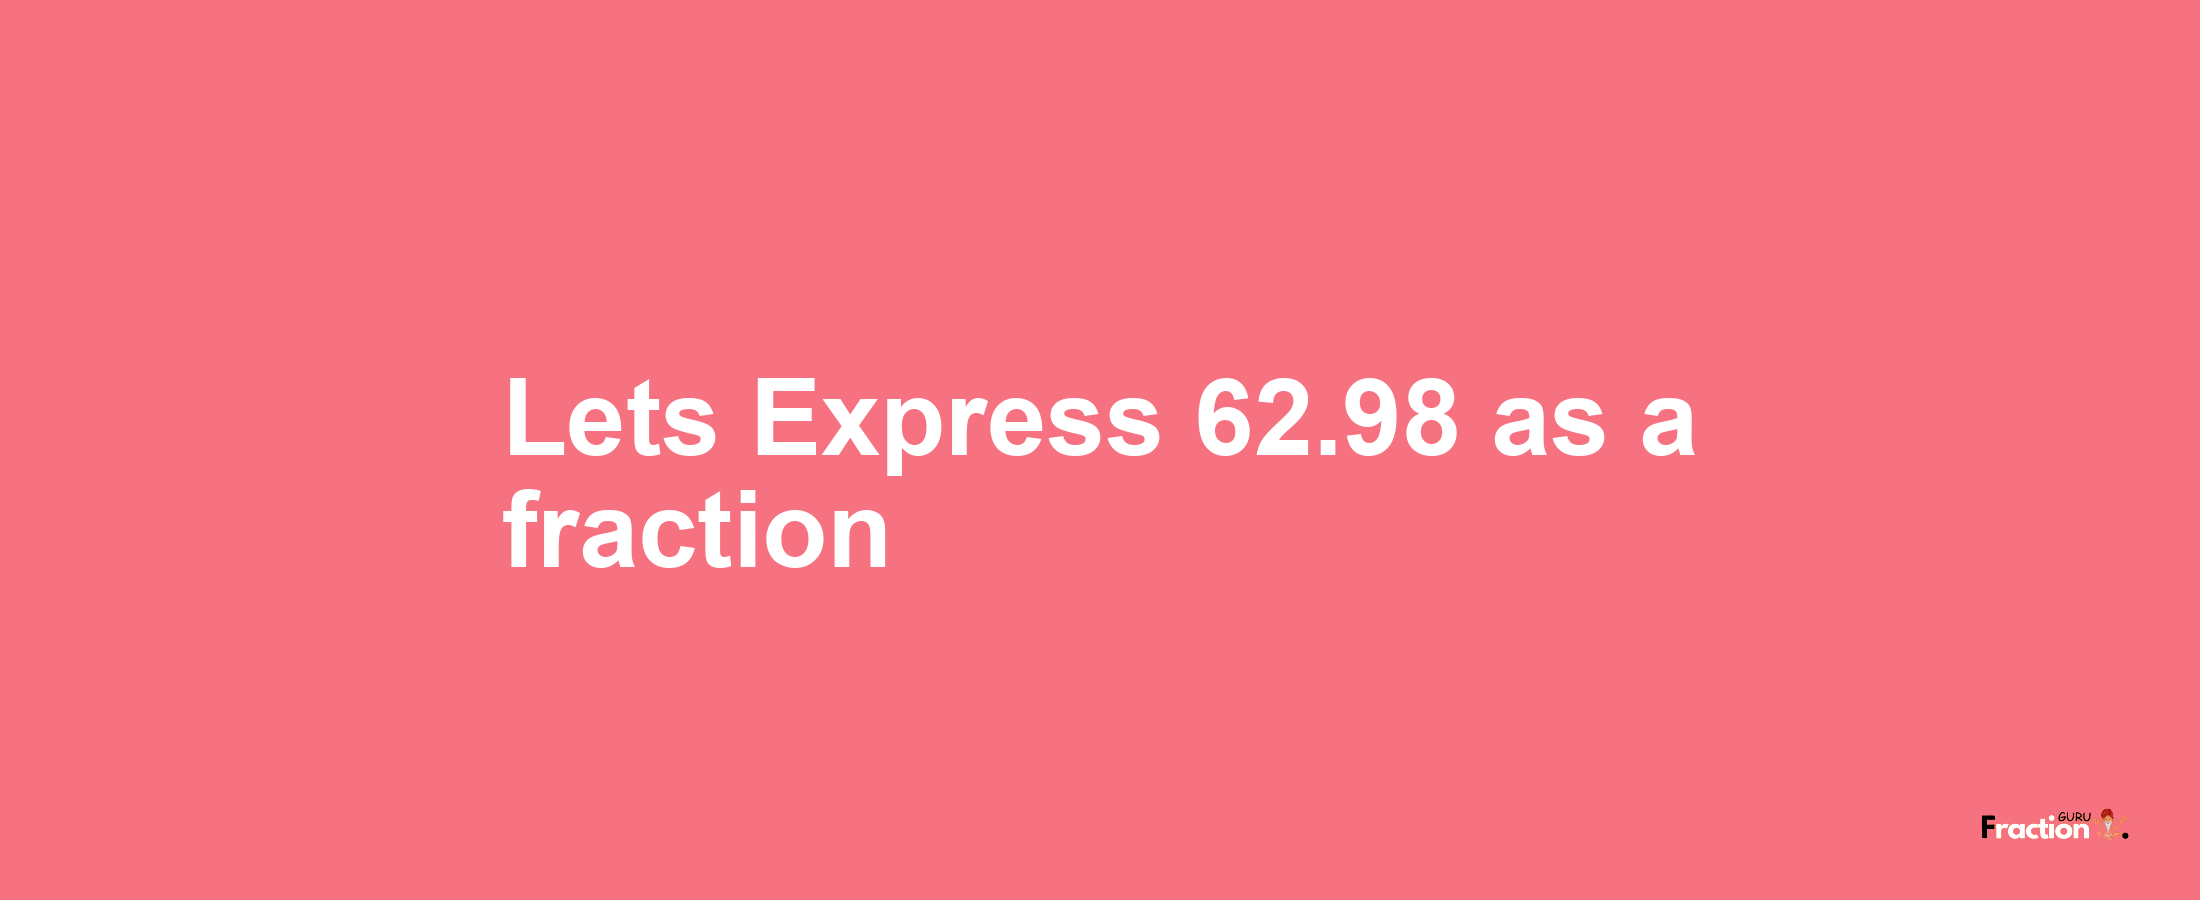 Lets Express 62.98 as afraction